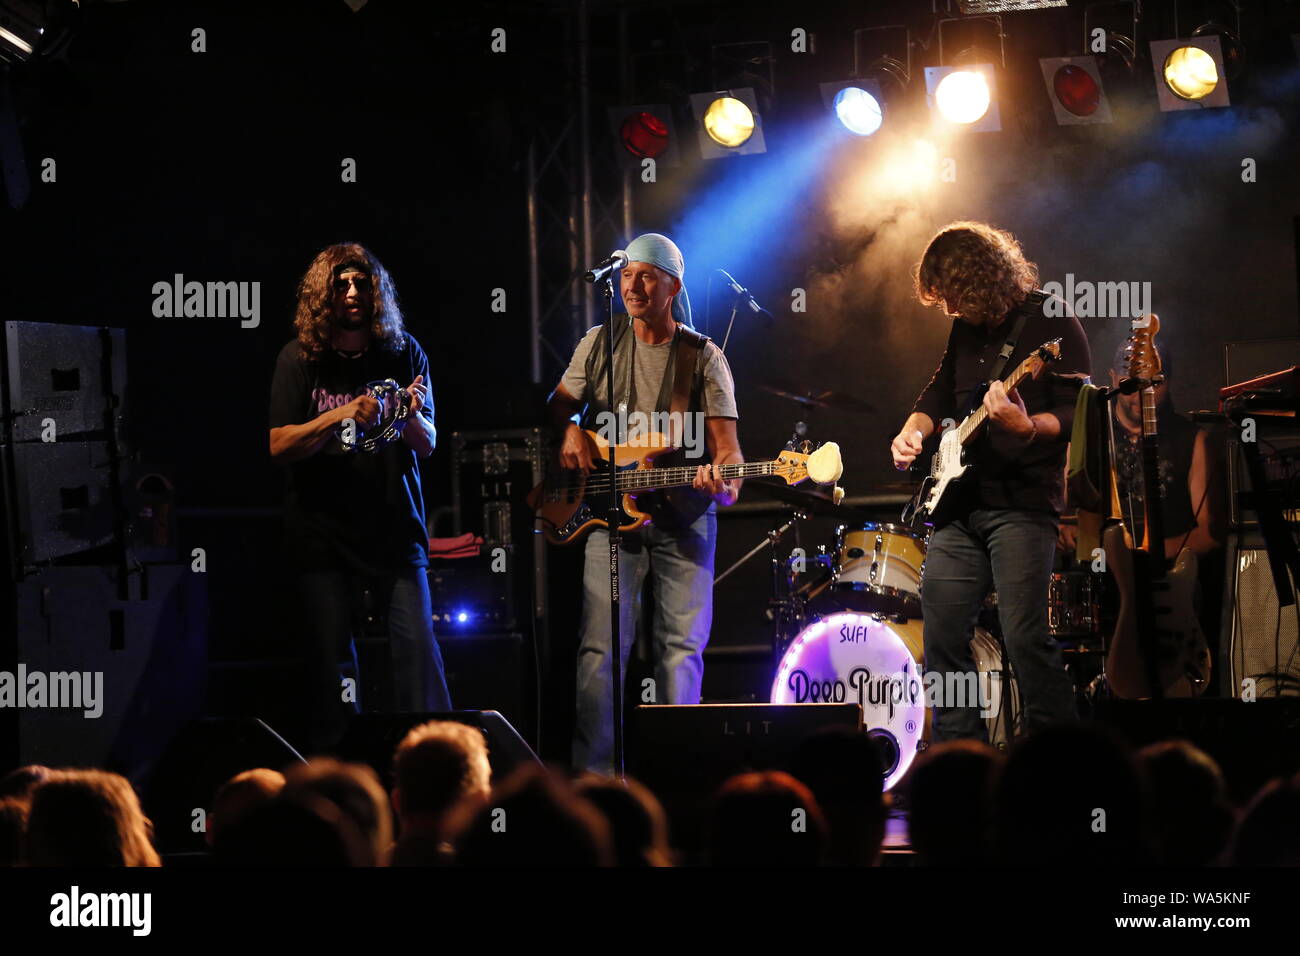 From Zlin comes one of the oldest and probably most successful Czech  Coverbands. Deep Purple Revival or "Koberec Band" named after the frontman  Miroslaw "Koberec" Konarek. The band was founded in the